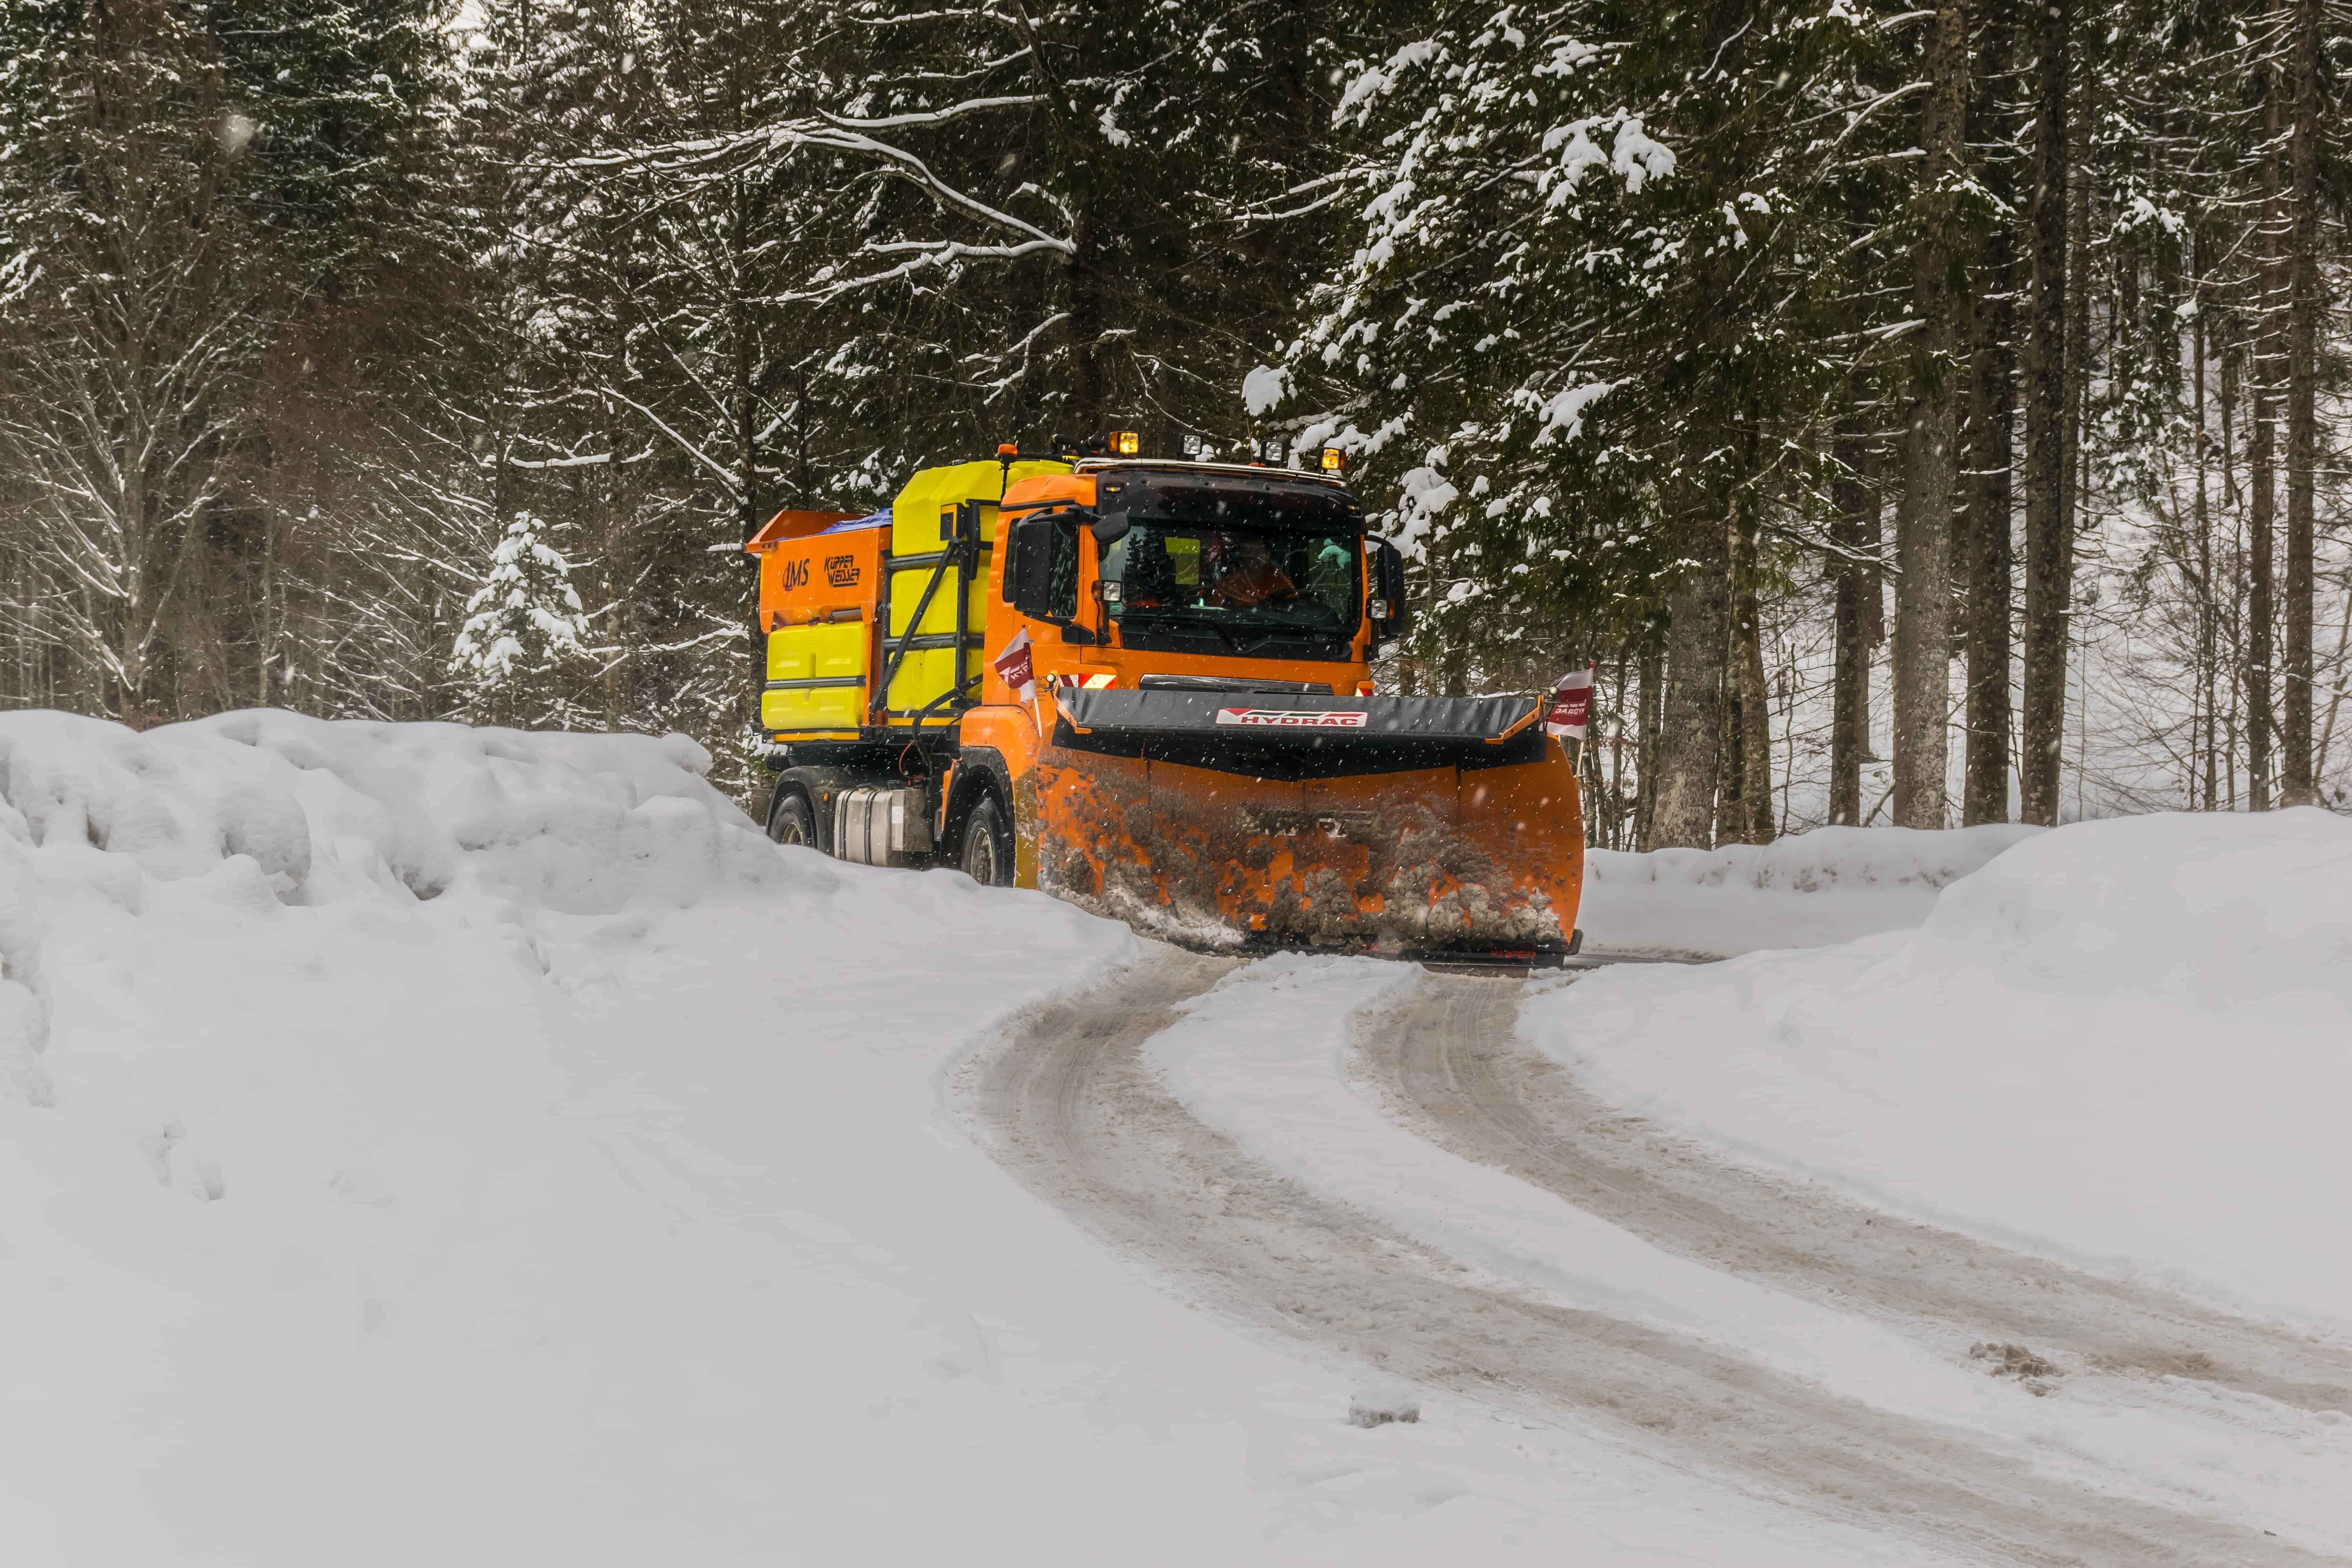 Truck Plowing Snow | Stockpile Reports